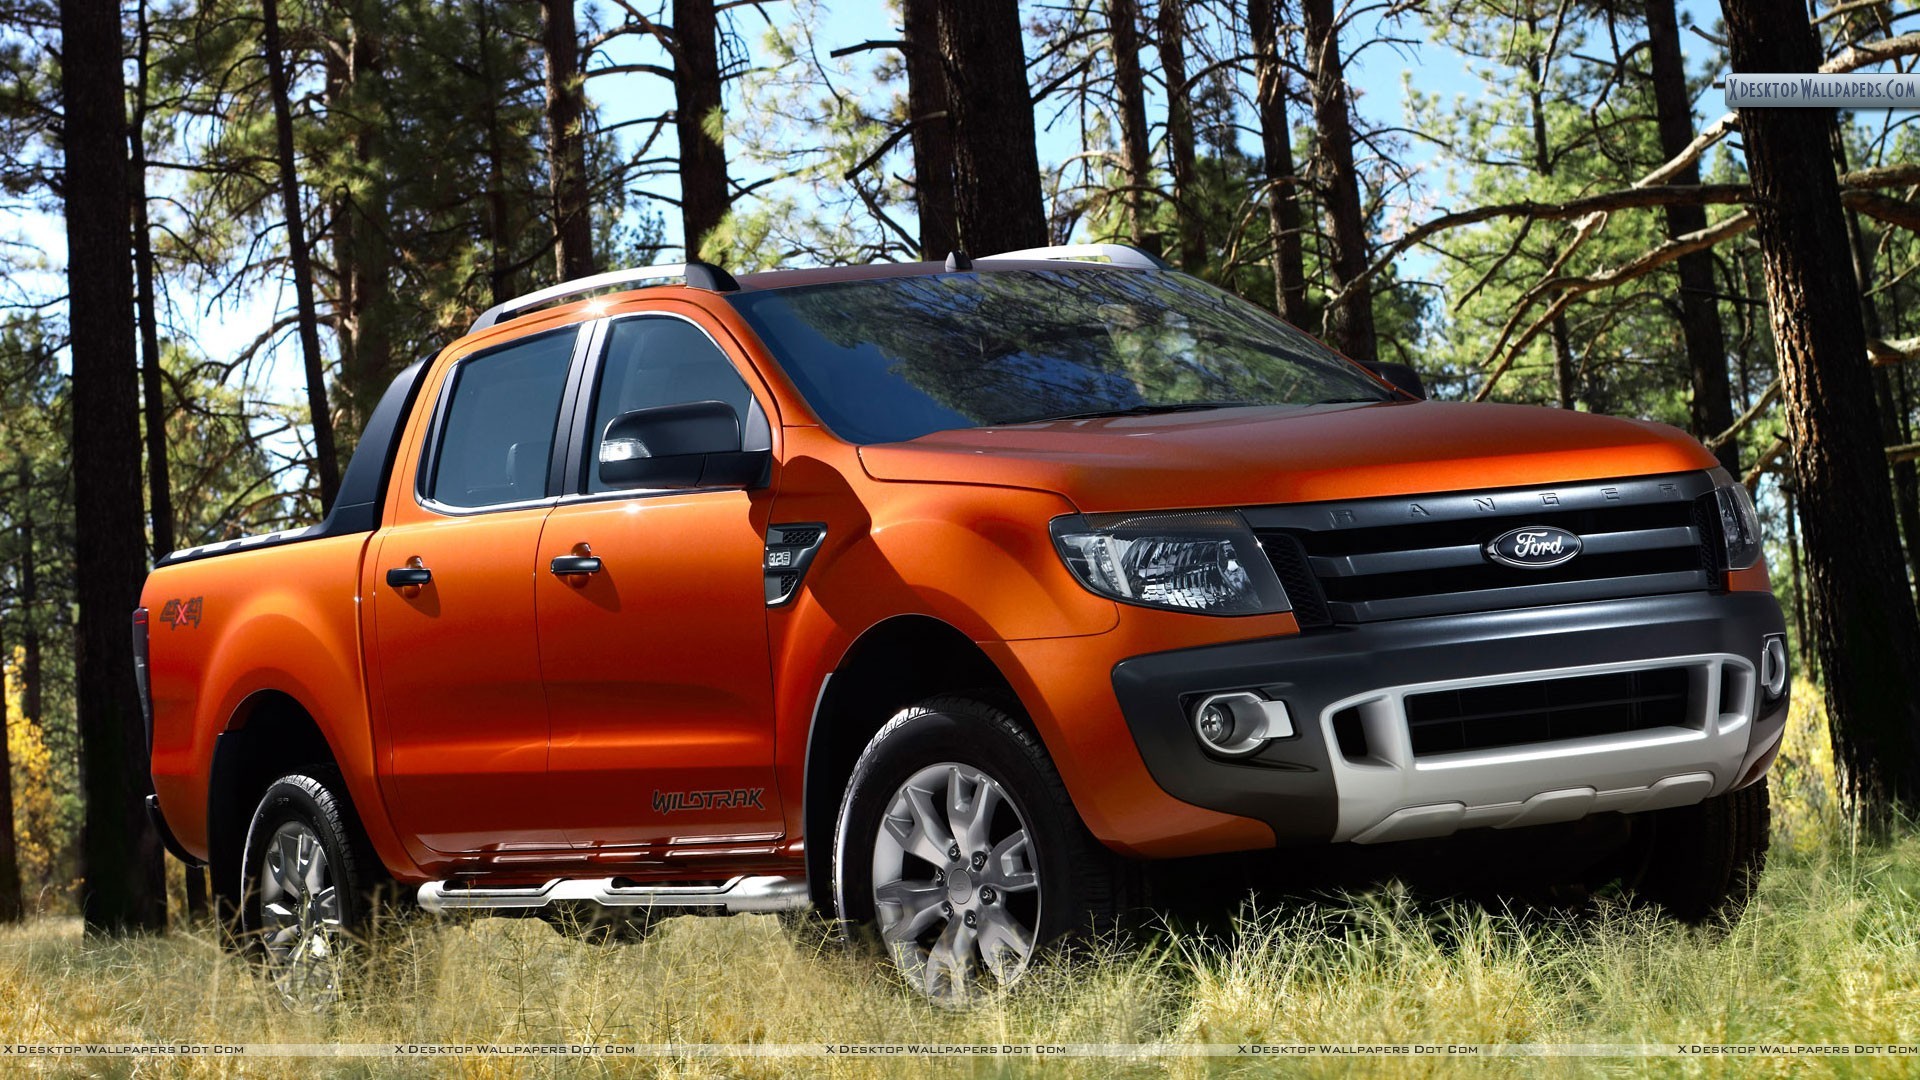 1920x1080 Ford Ranger Wallpapers, Photos Images in HD